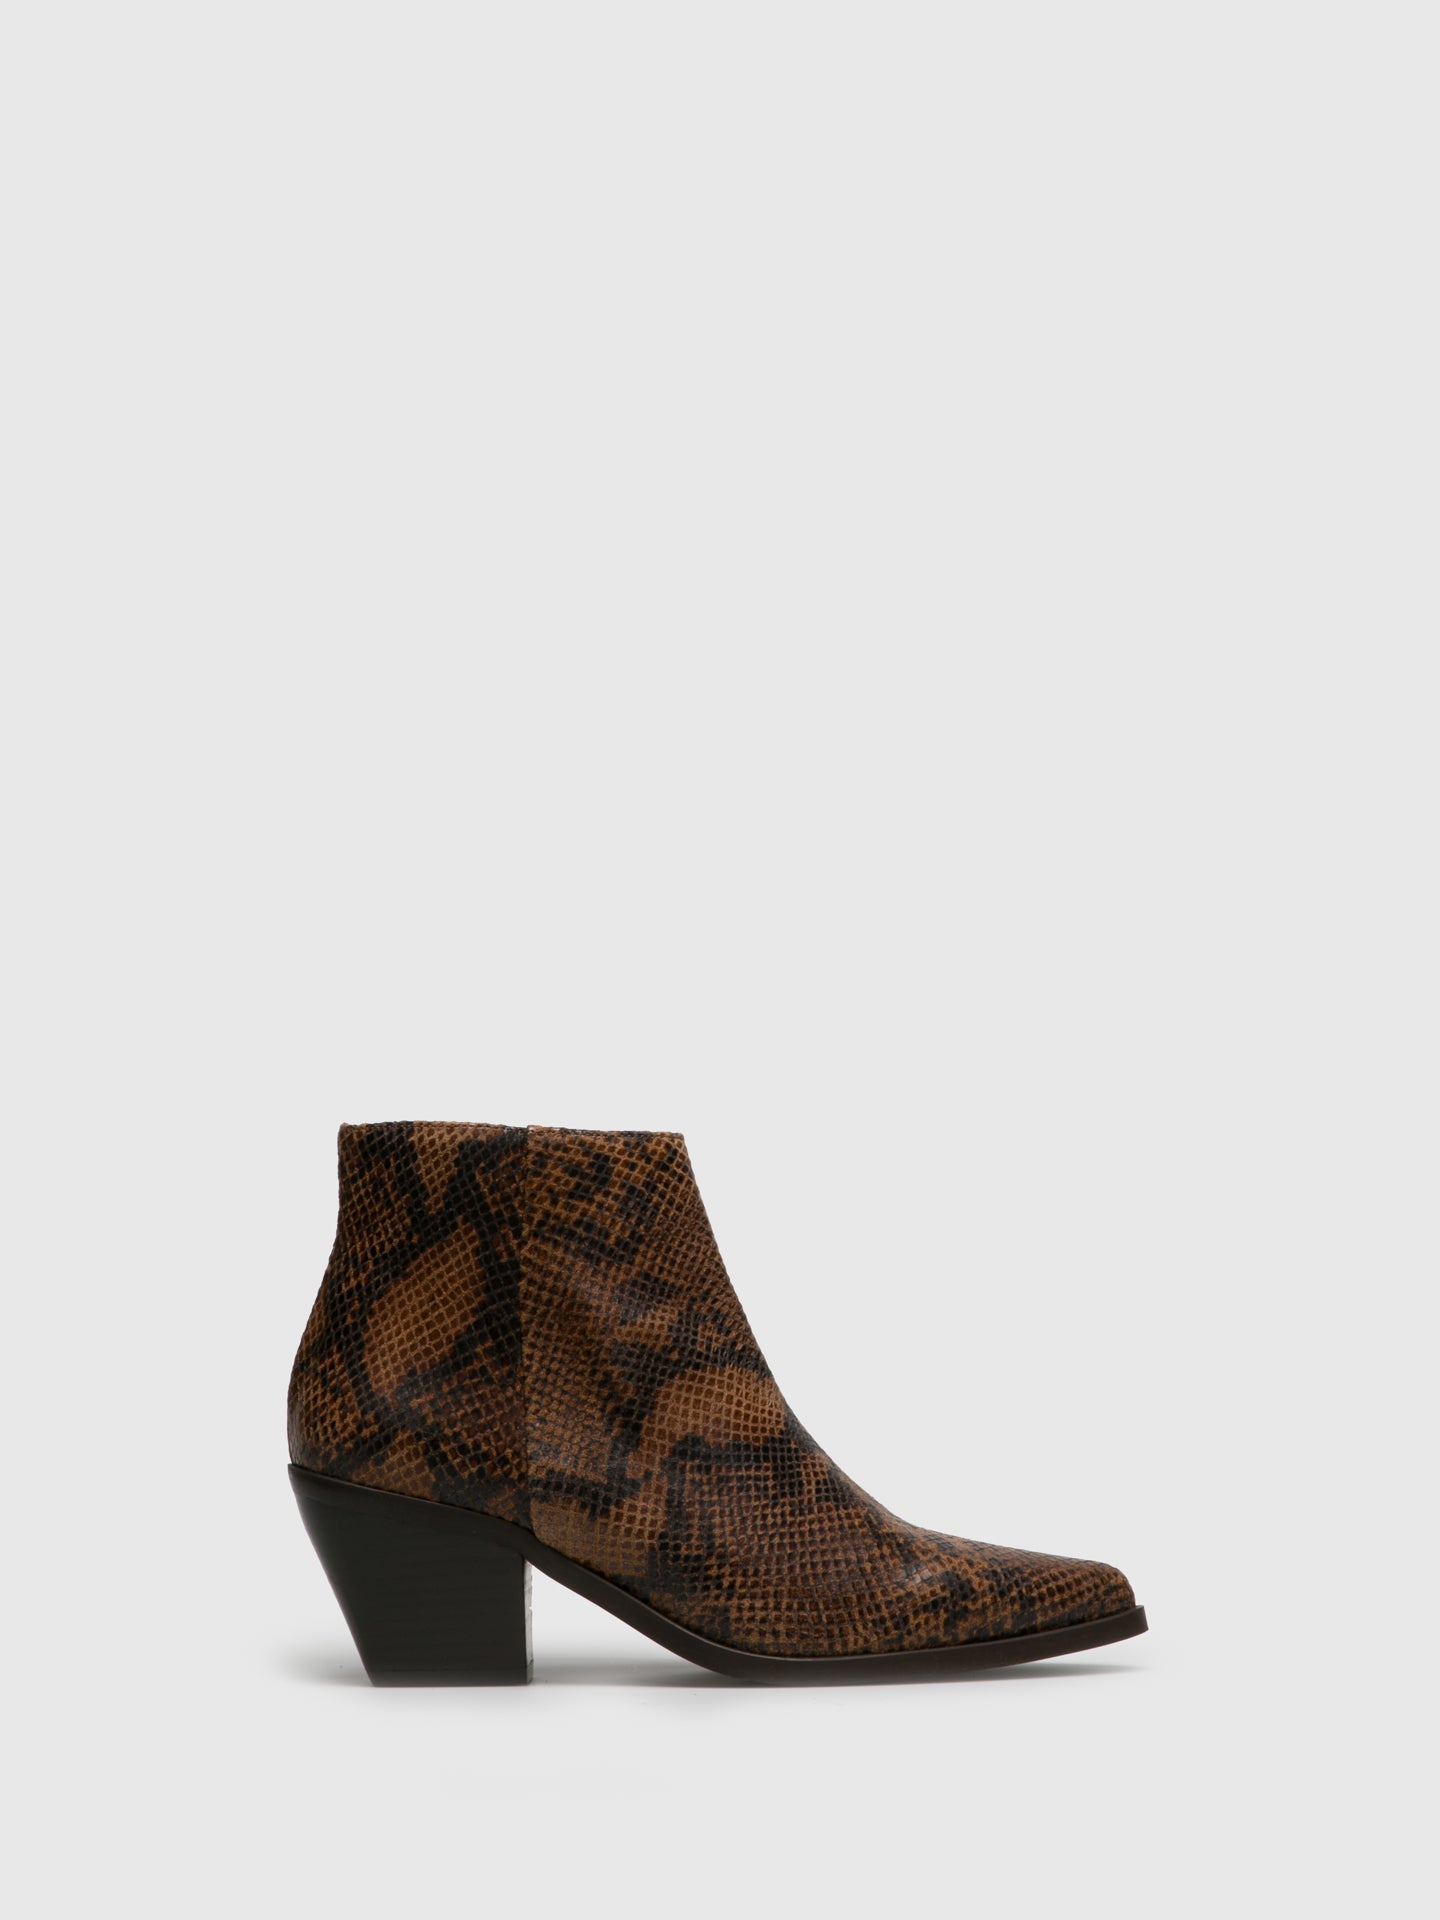 Foreva Camel Cowboy Ankle Boots